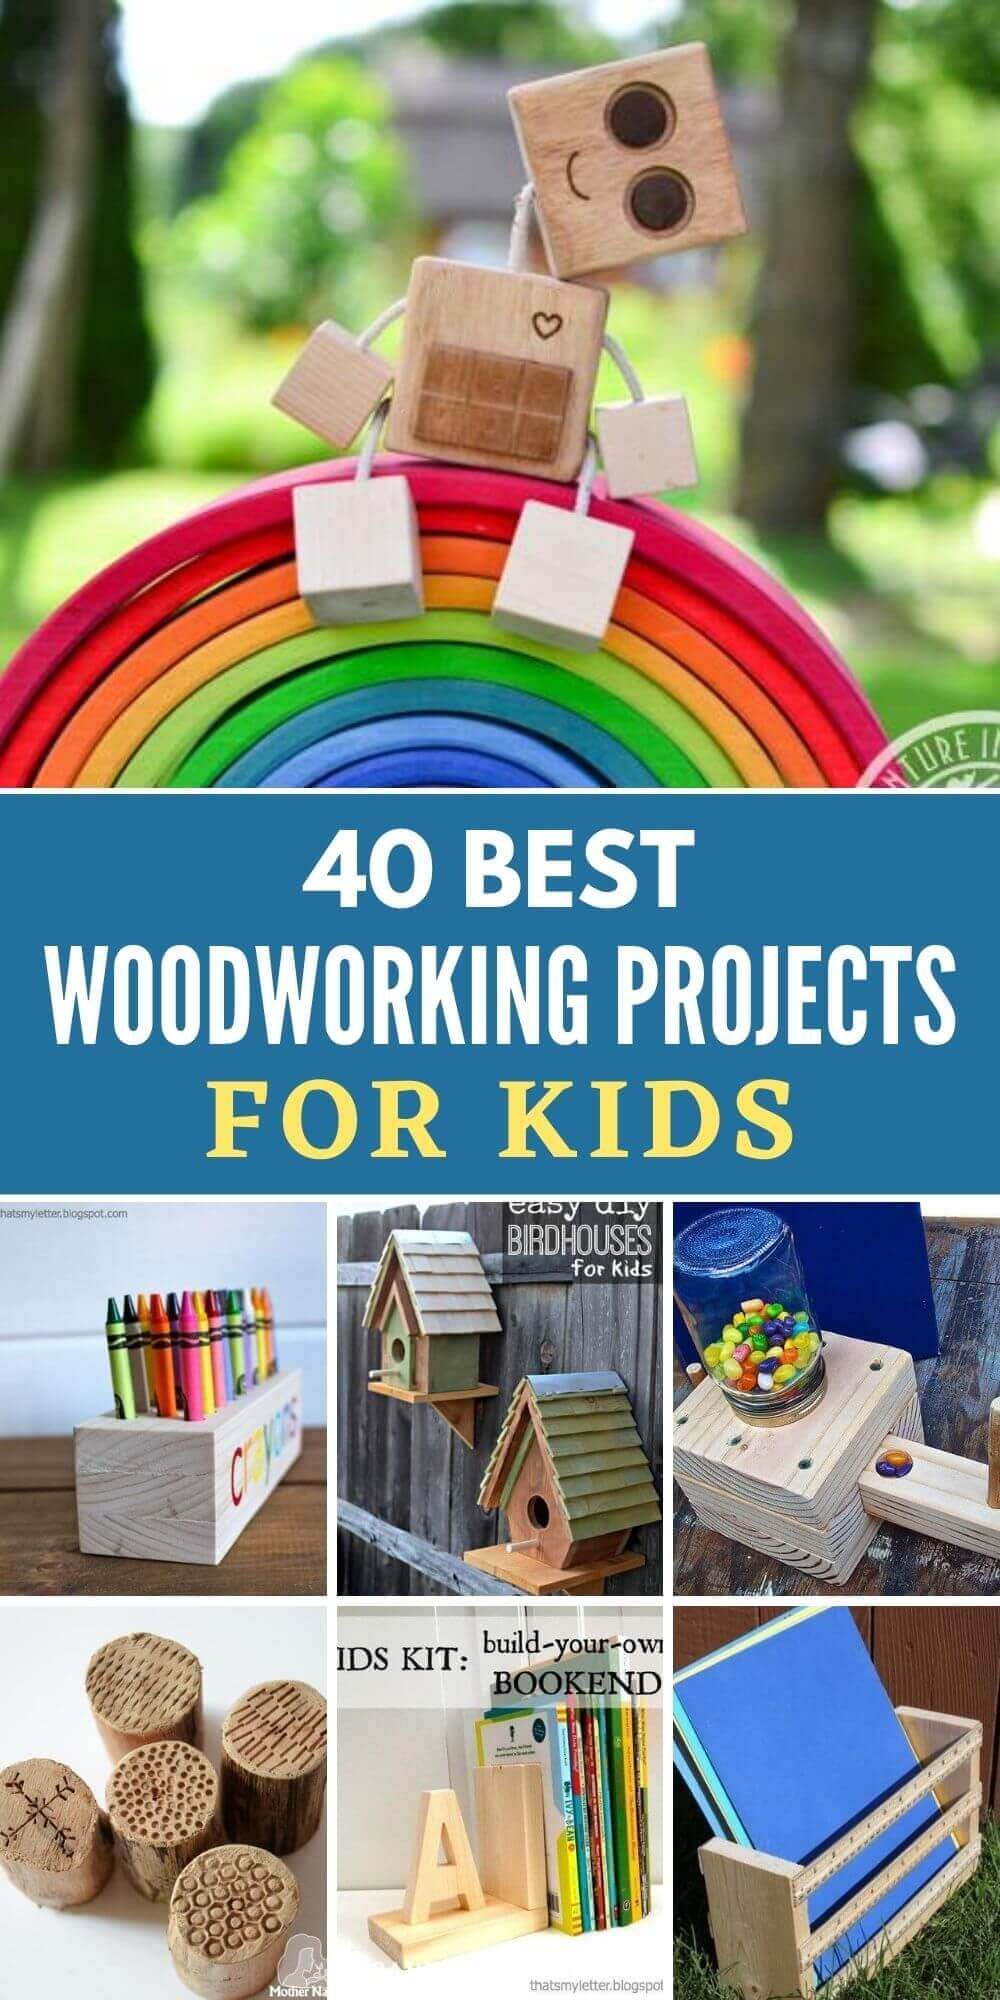 Woodworking projects for special needs students